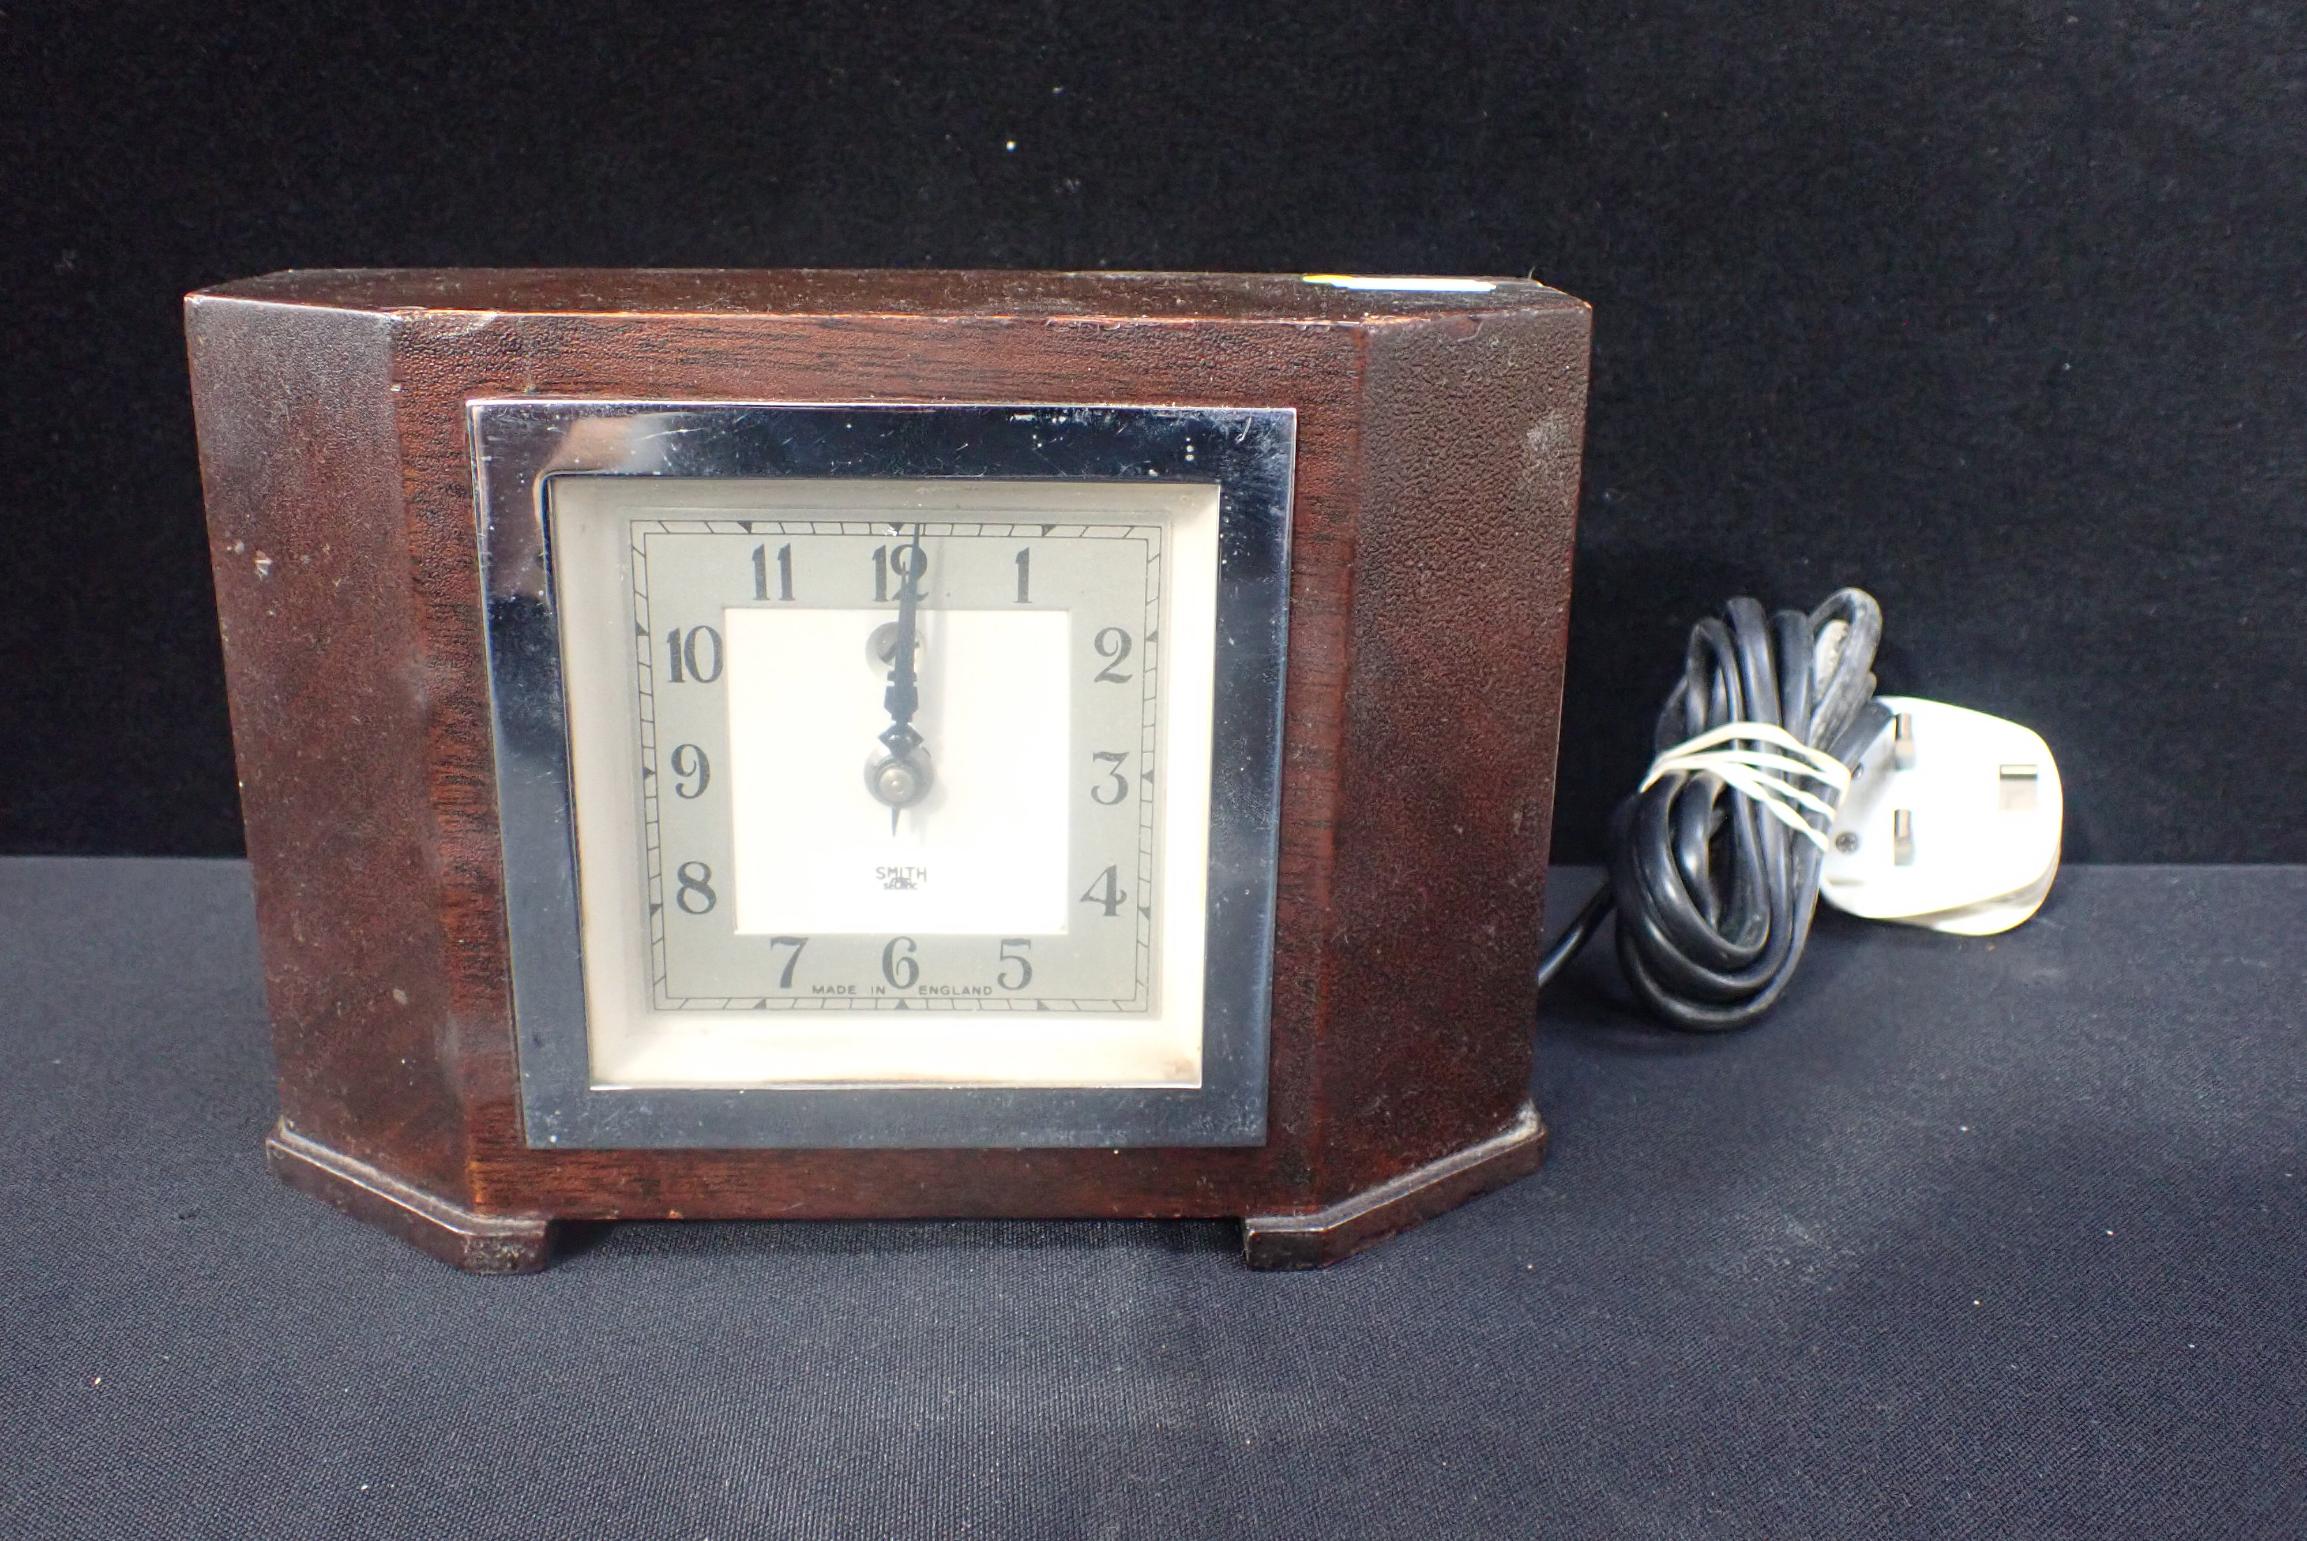 A SMITHS 'SECTRIC' ART DECO STYLE ELECTRIC CLOCK